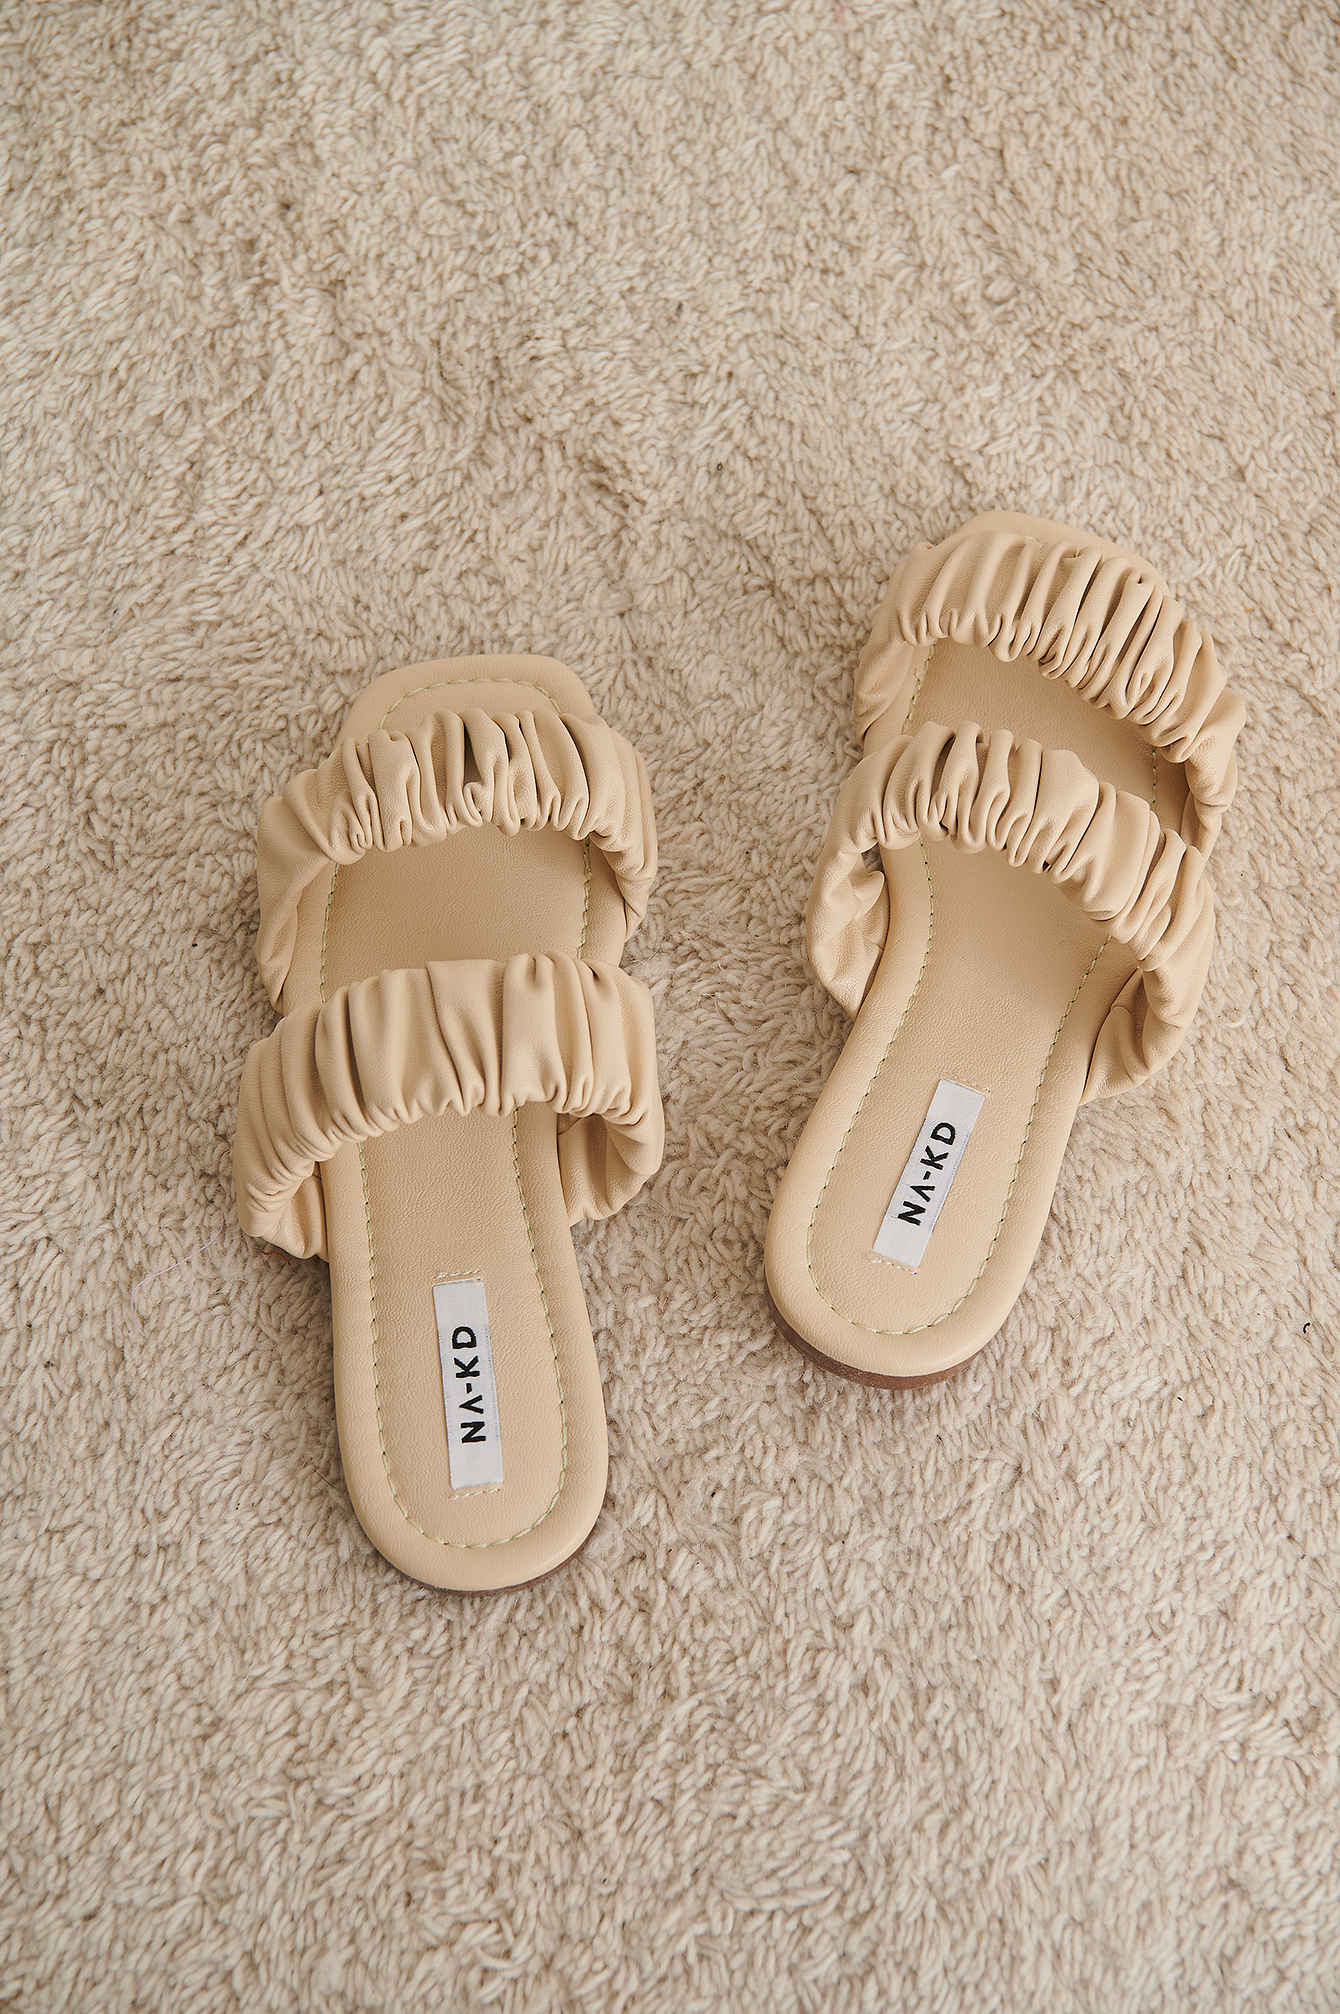 Offwhite Ruffled Double Strap Flats